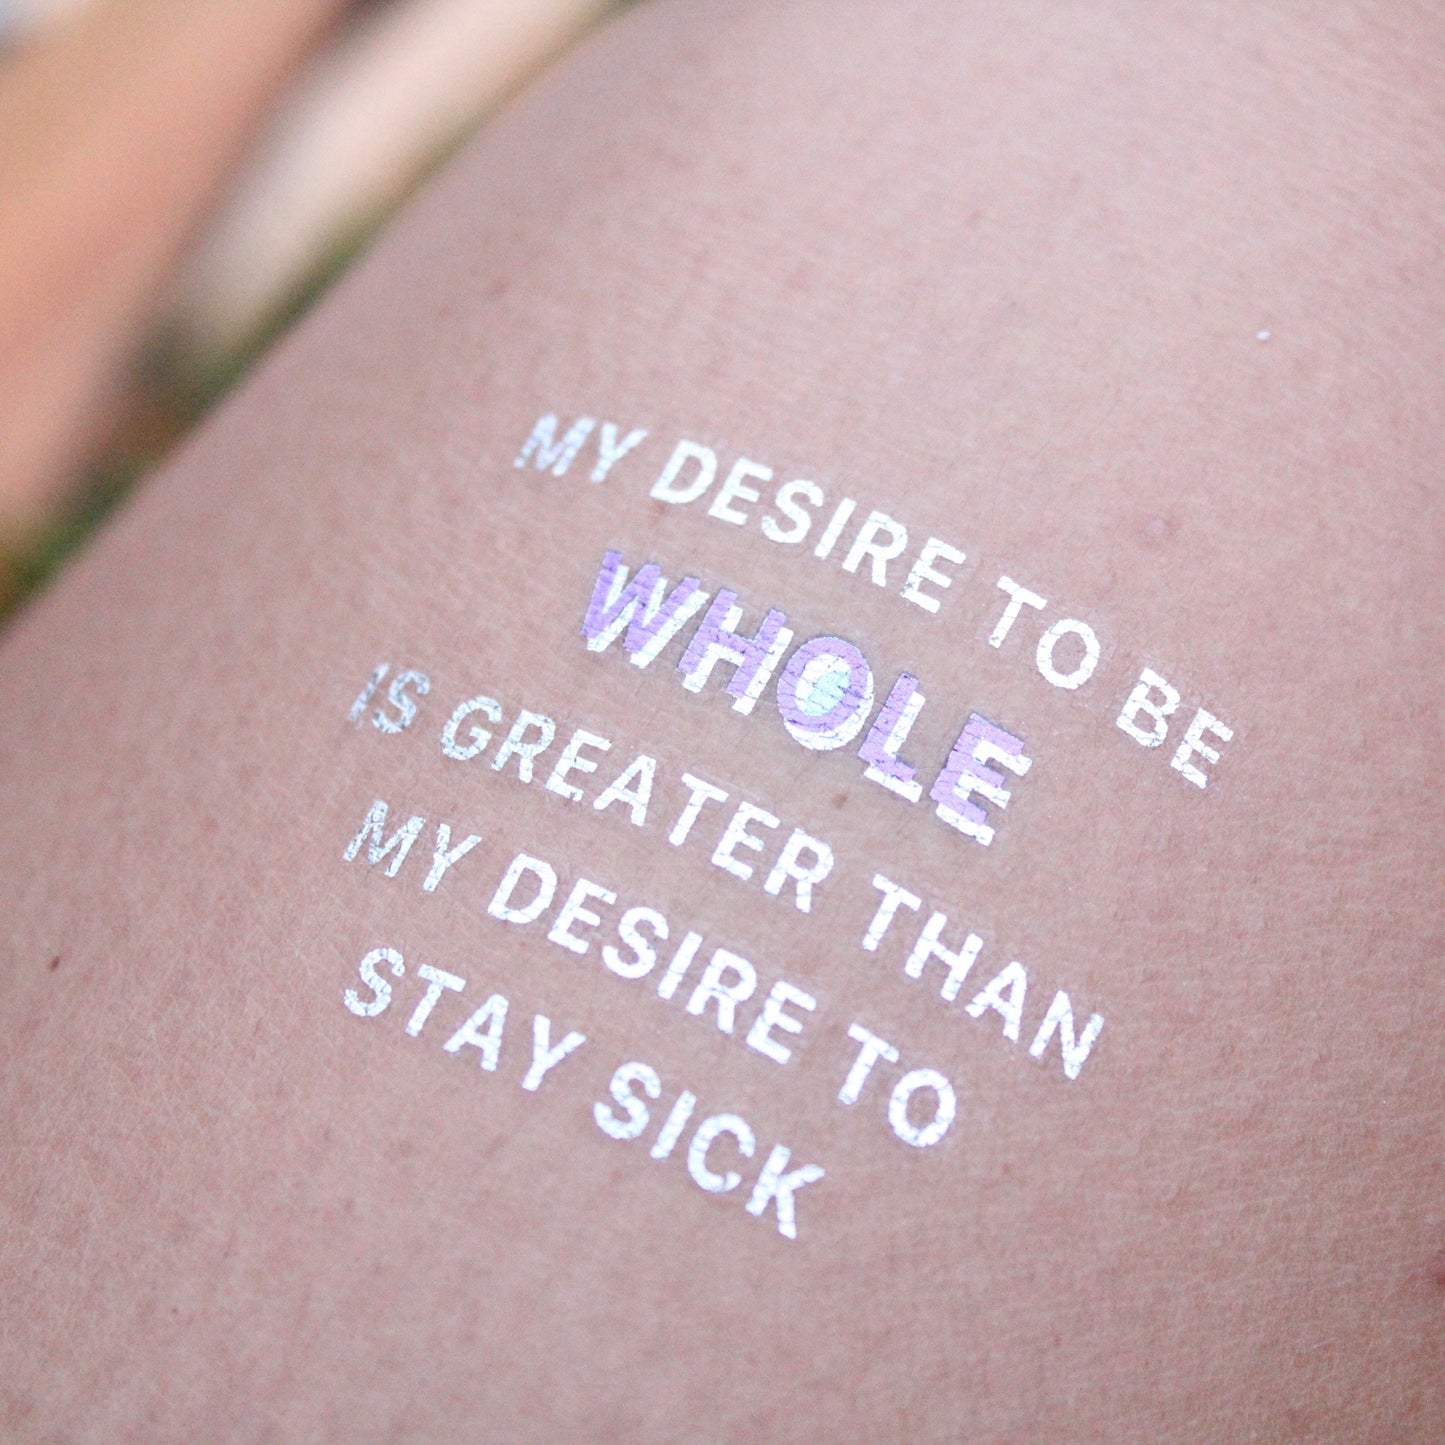 MY DESIRE TO BE WHOLE